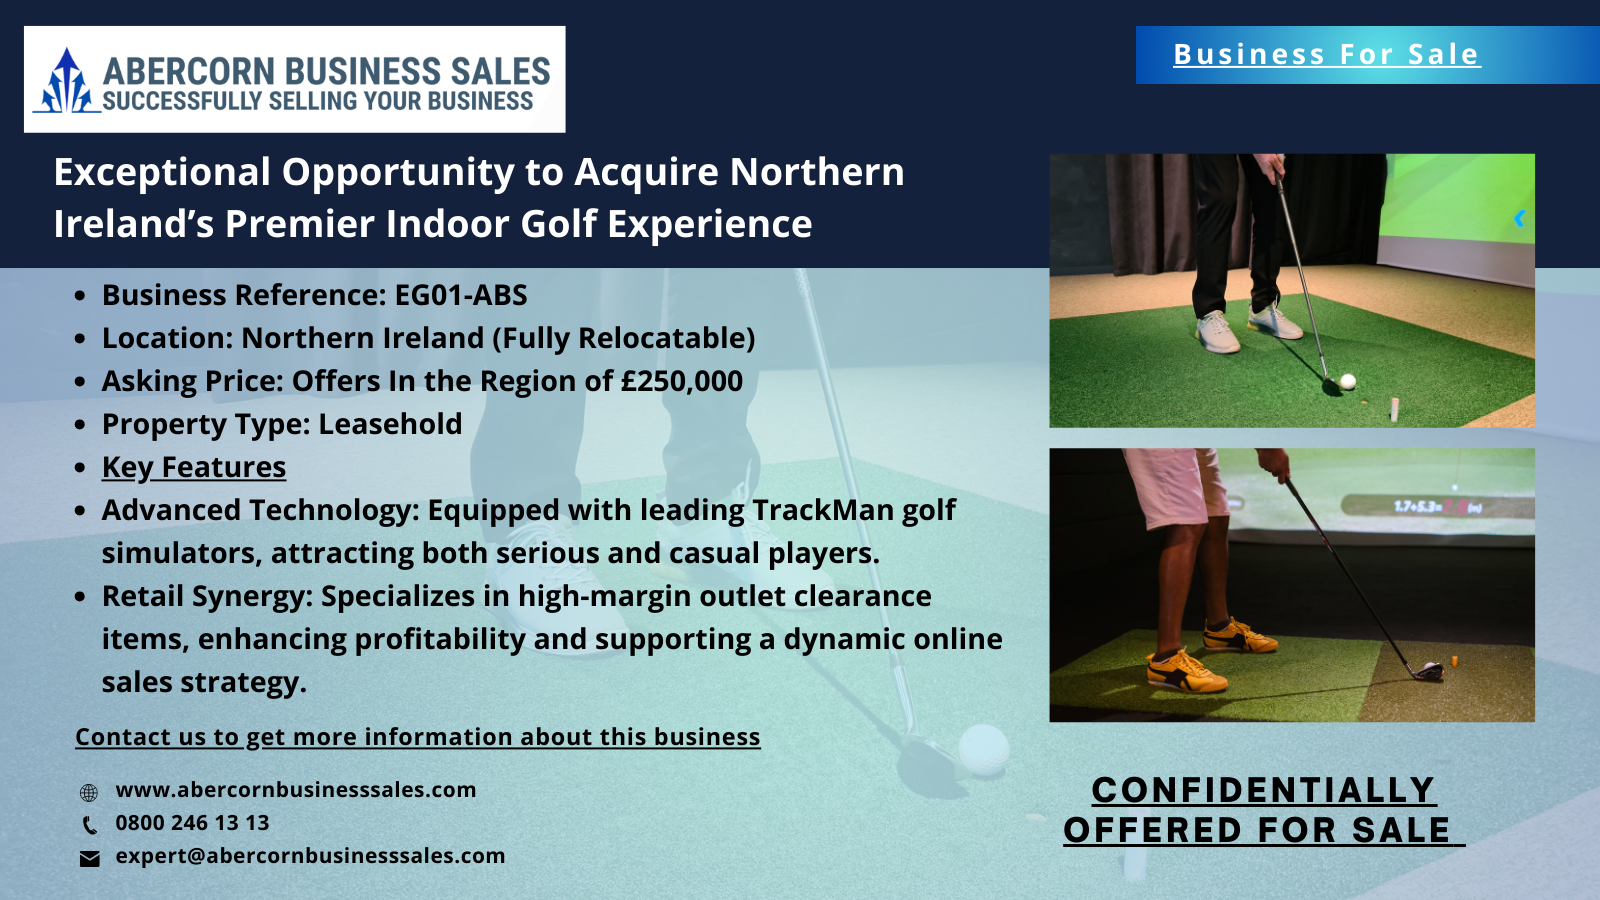 EG01-ABS - Exceptional Opportunity to Acquire Northern Irelands Premier Indoor Golf Experience